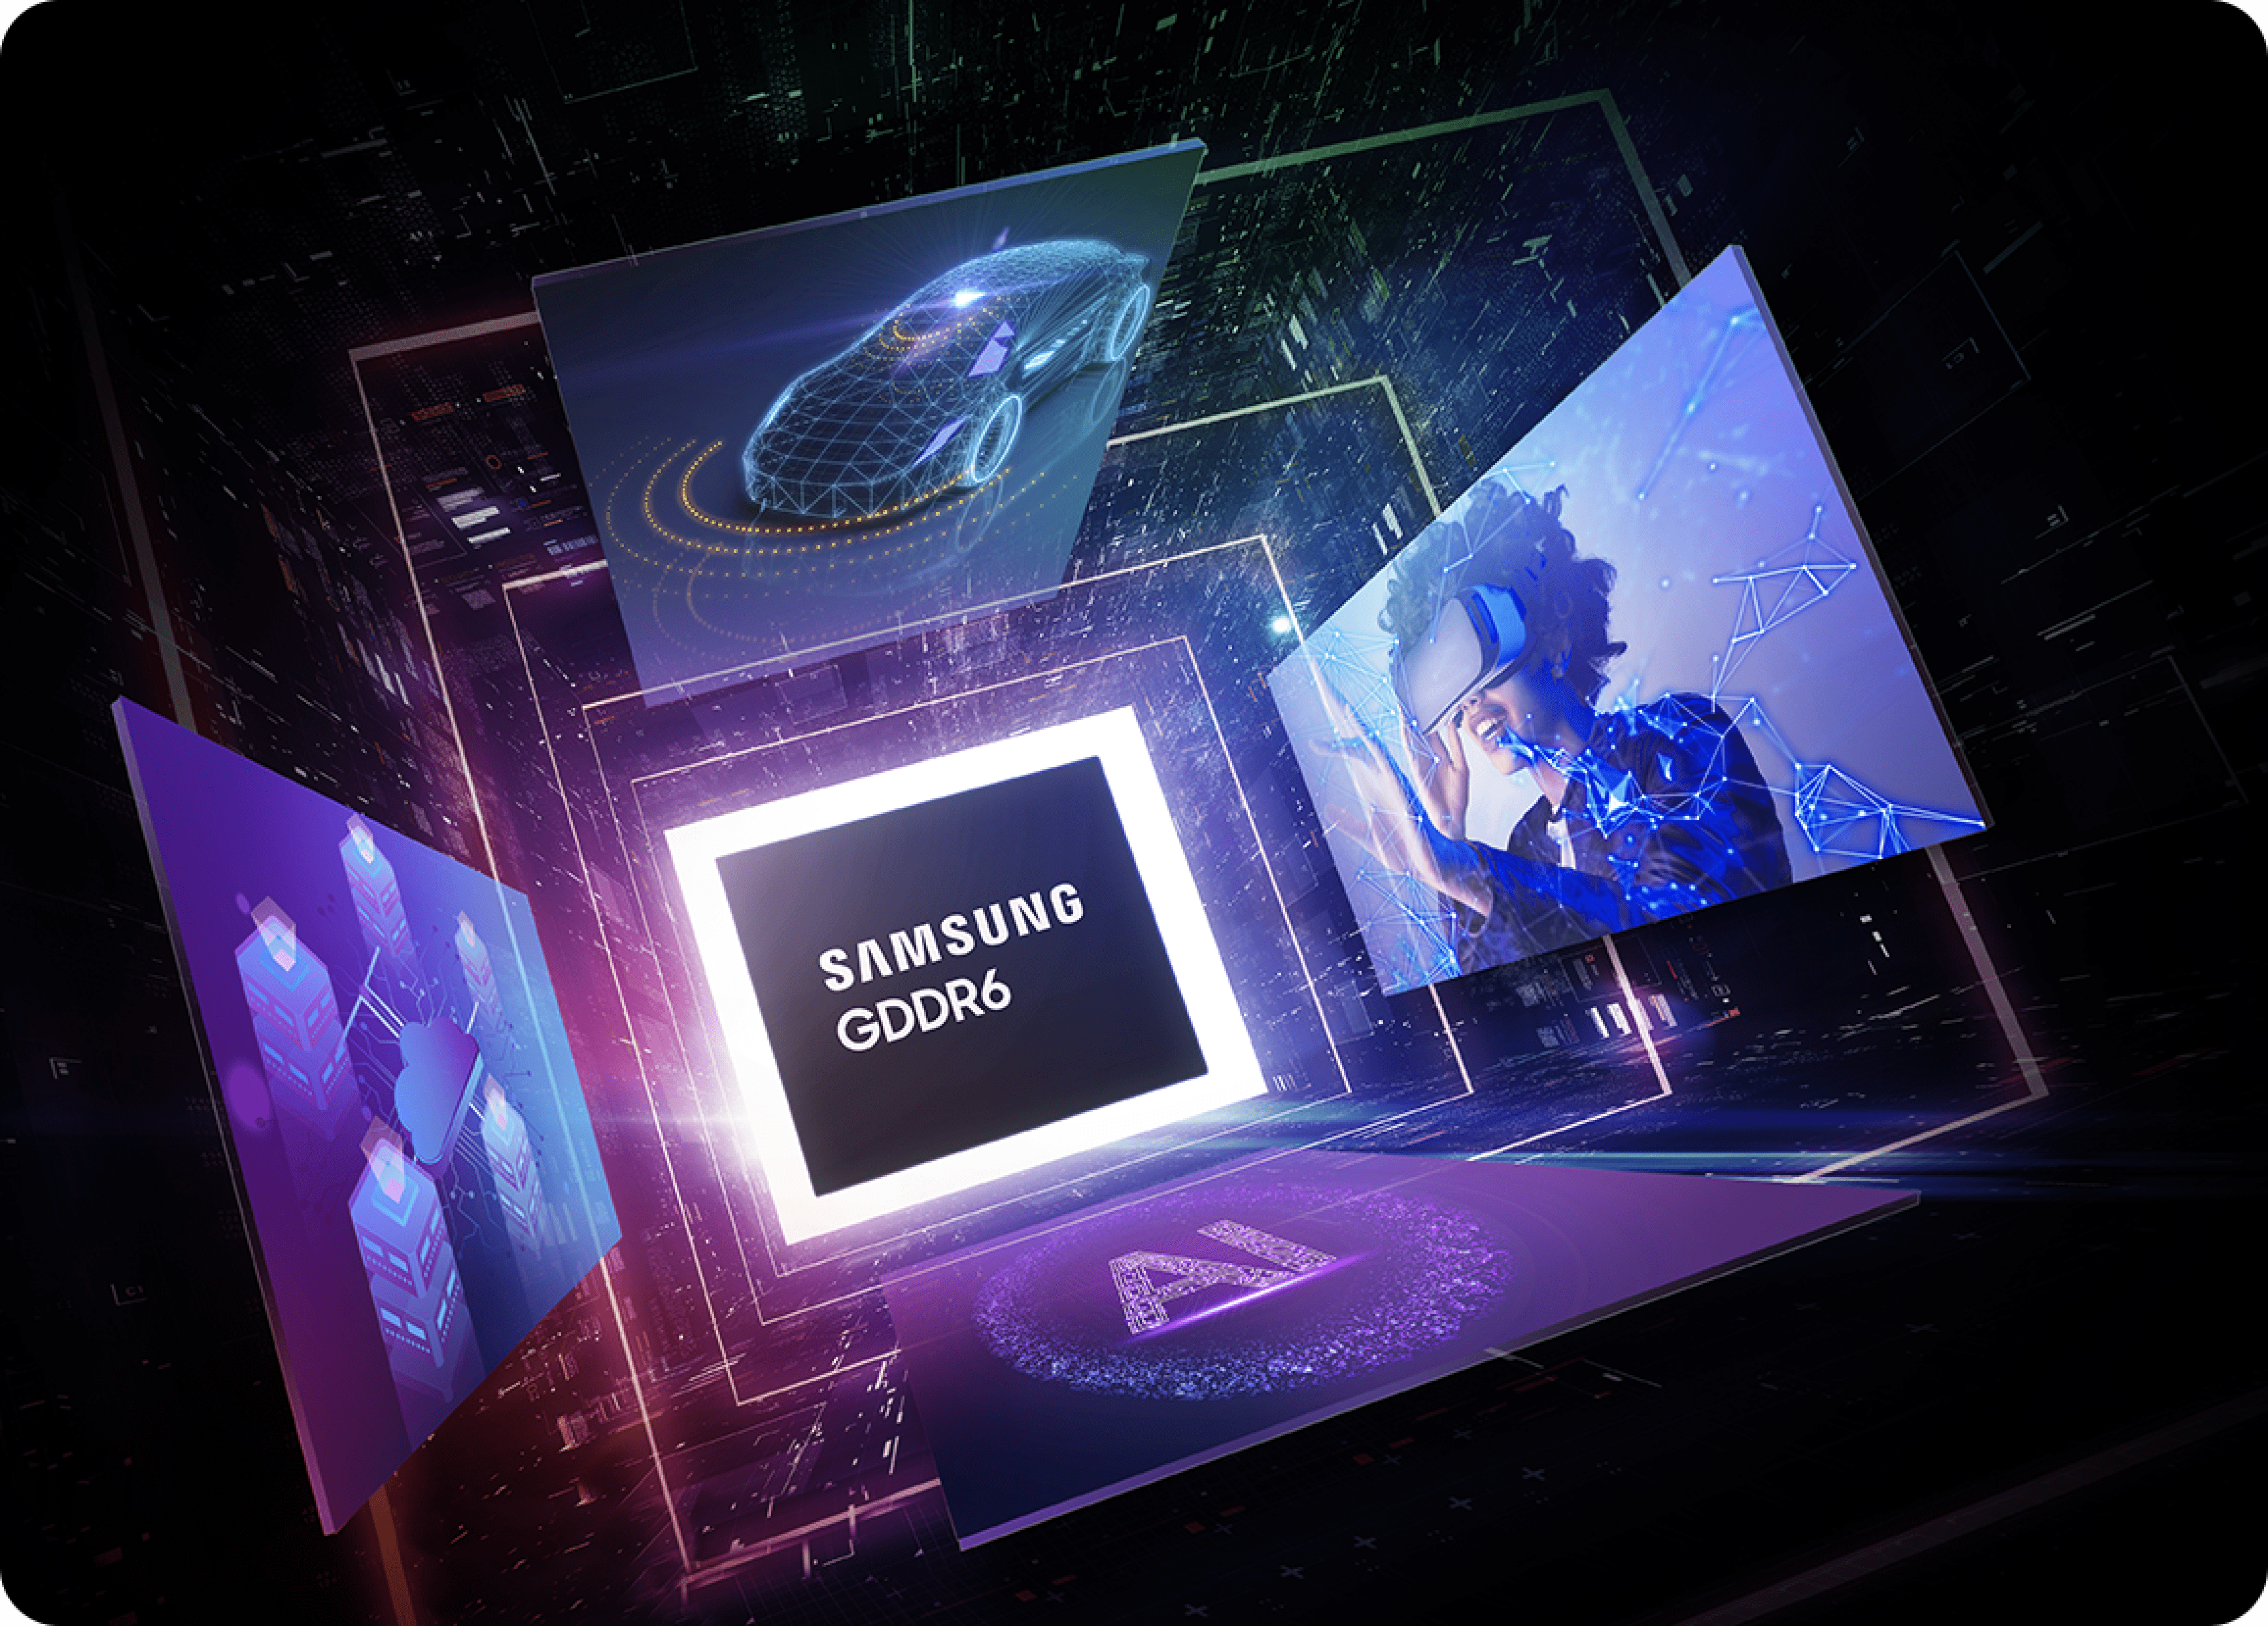 Samsung GDDR6 is built to stretch the role of graphic DRAM from VGA to high-performance computing and gaming to AI.